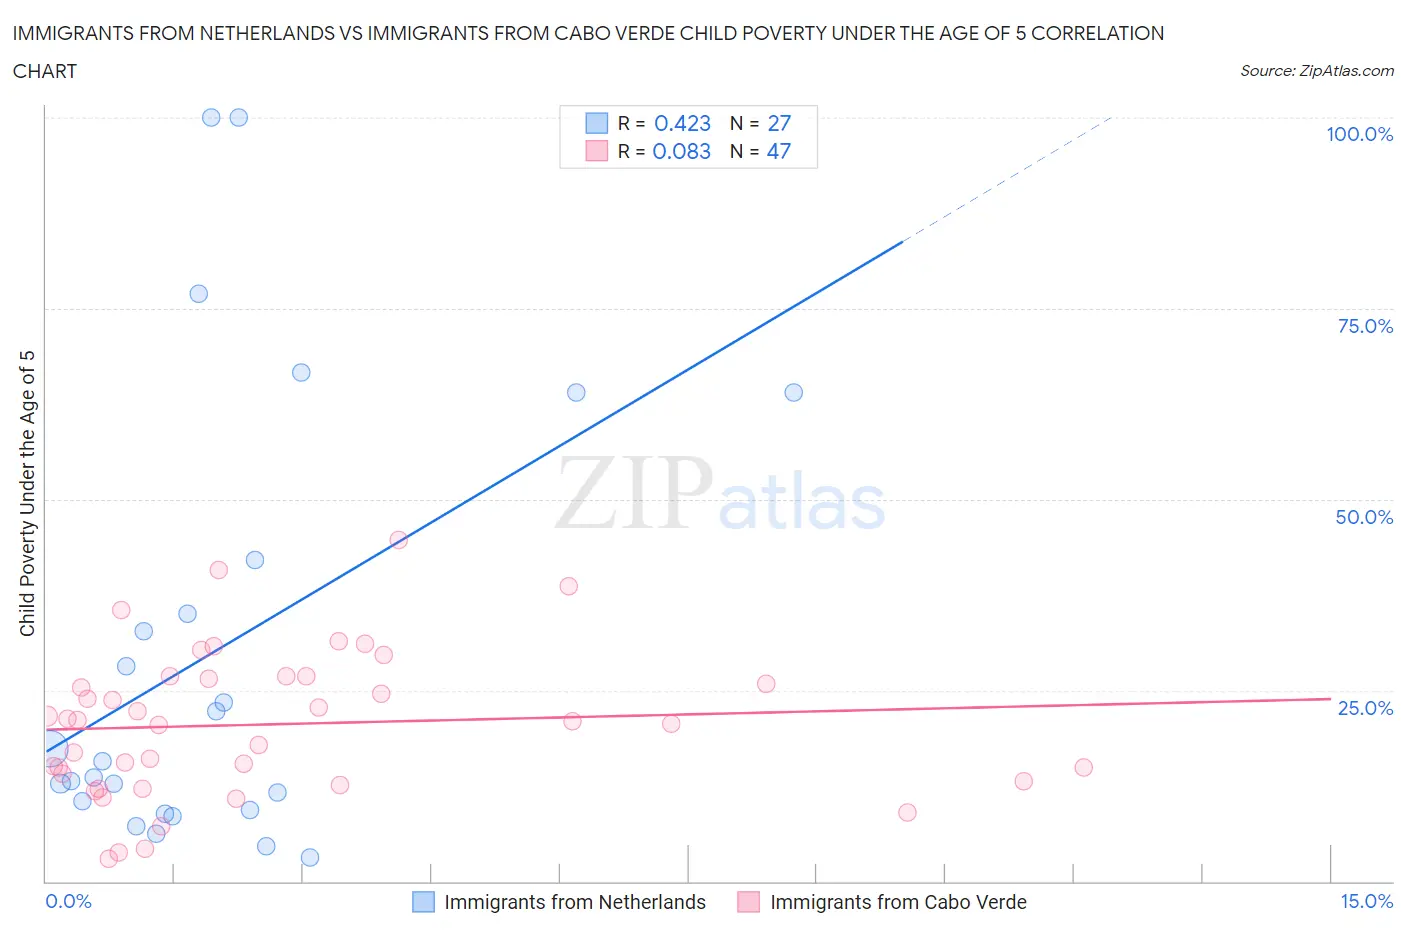 Immigrants from Netherlands vs Immigrants from Cabo Verde Child Poverty Under the Age of 5